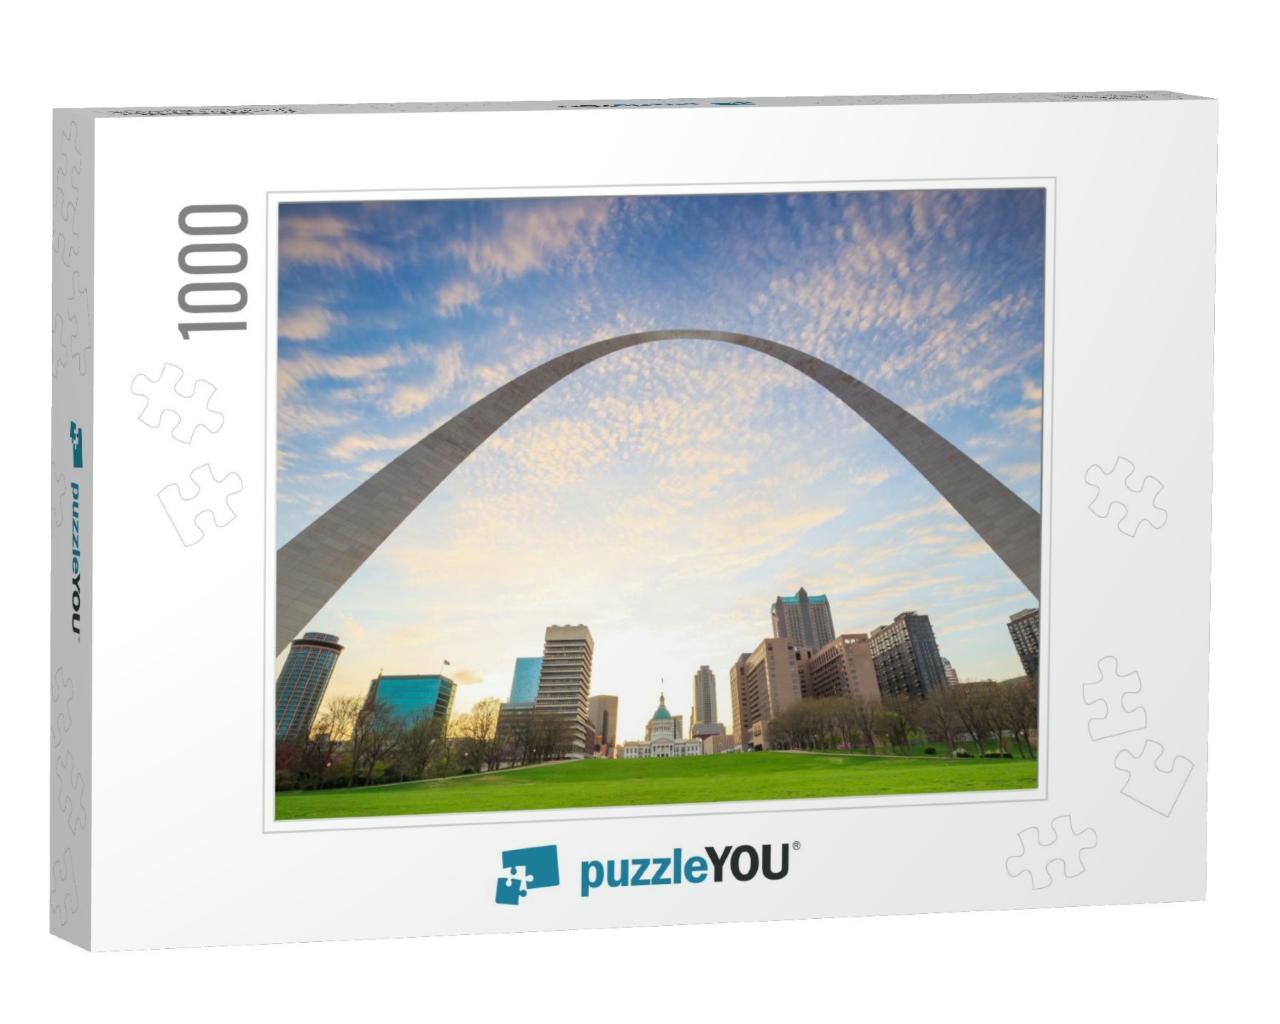 City of St. Louis Skyline At Twilight... Jigsaw Puzzle with 1000 pieces